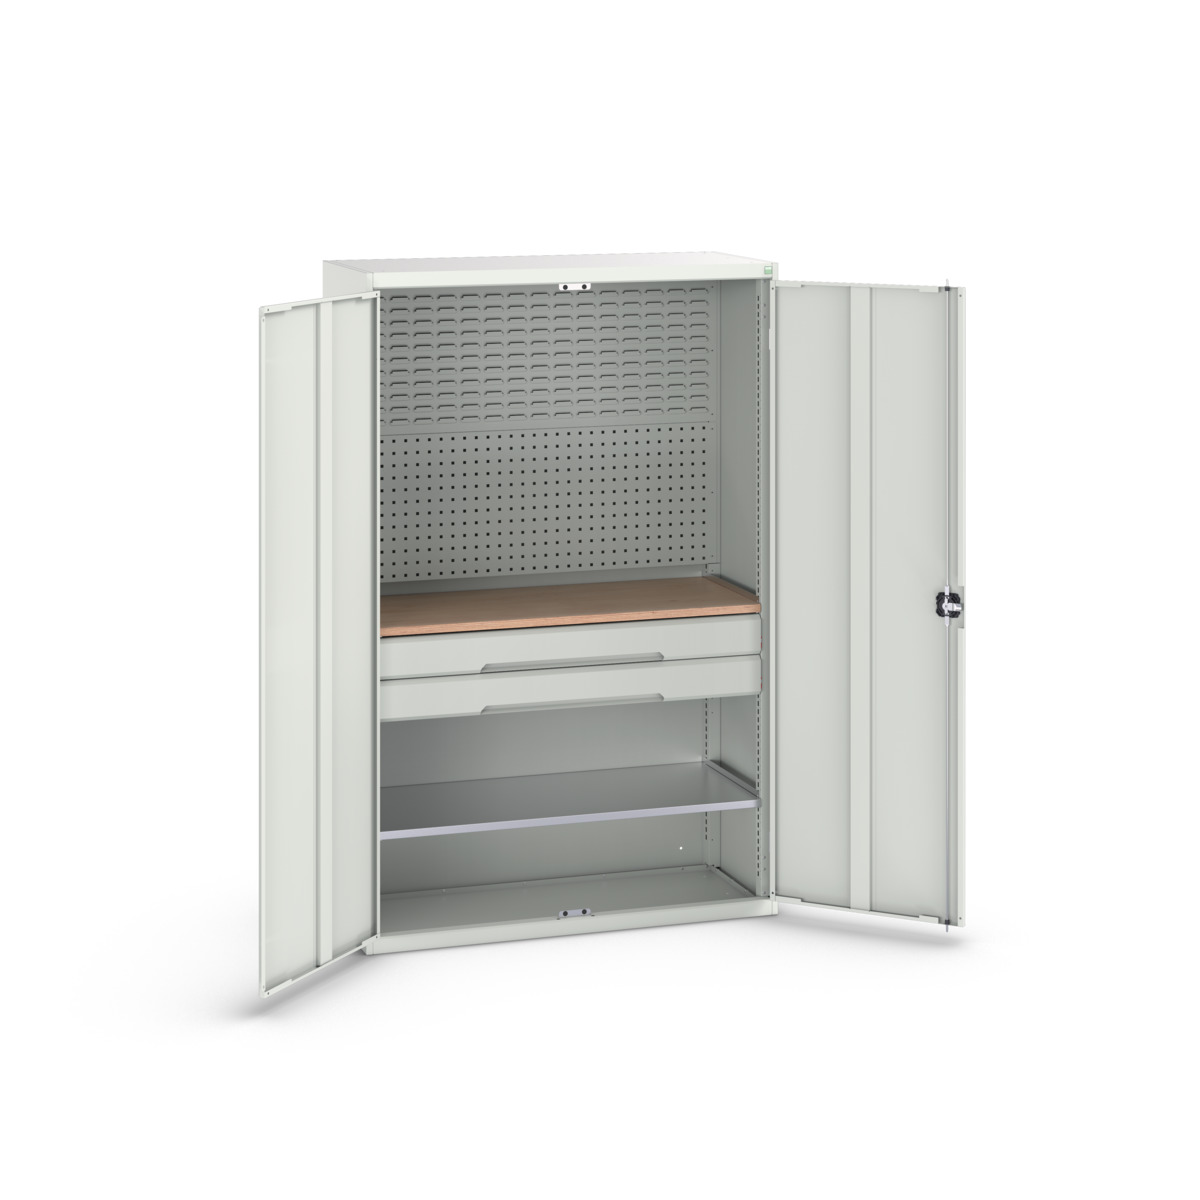 16926593.16 - verso kitted cupboard